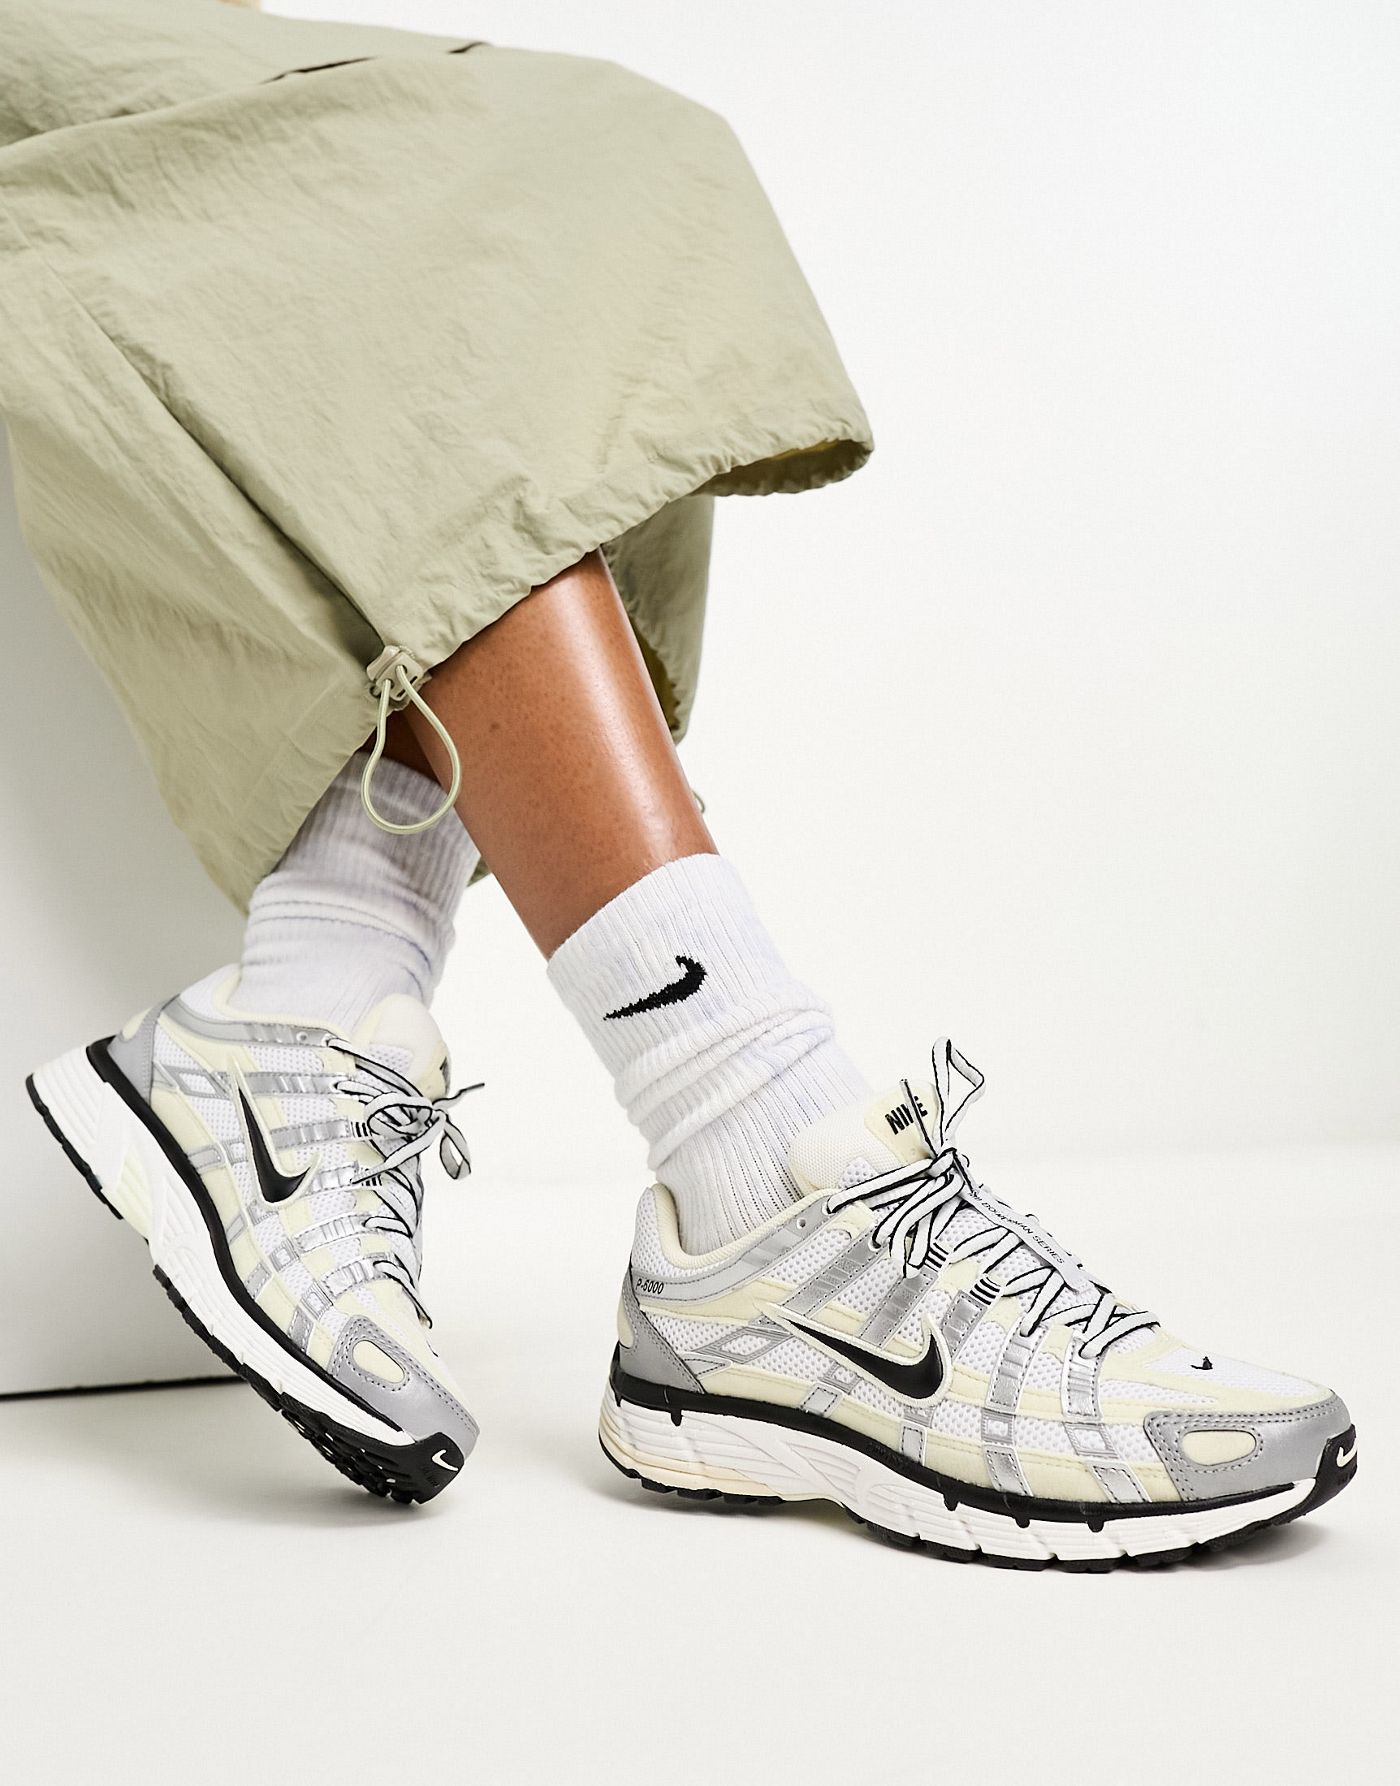 Nike P-6000 unisex trainers in beige and black